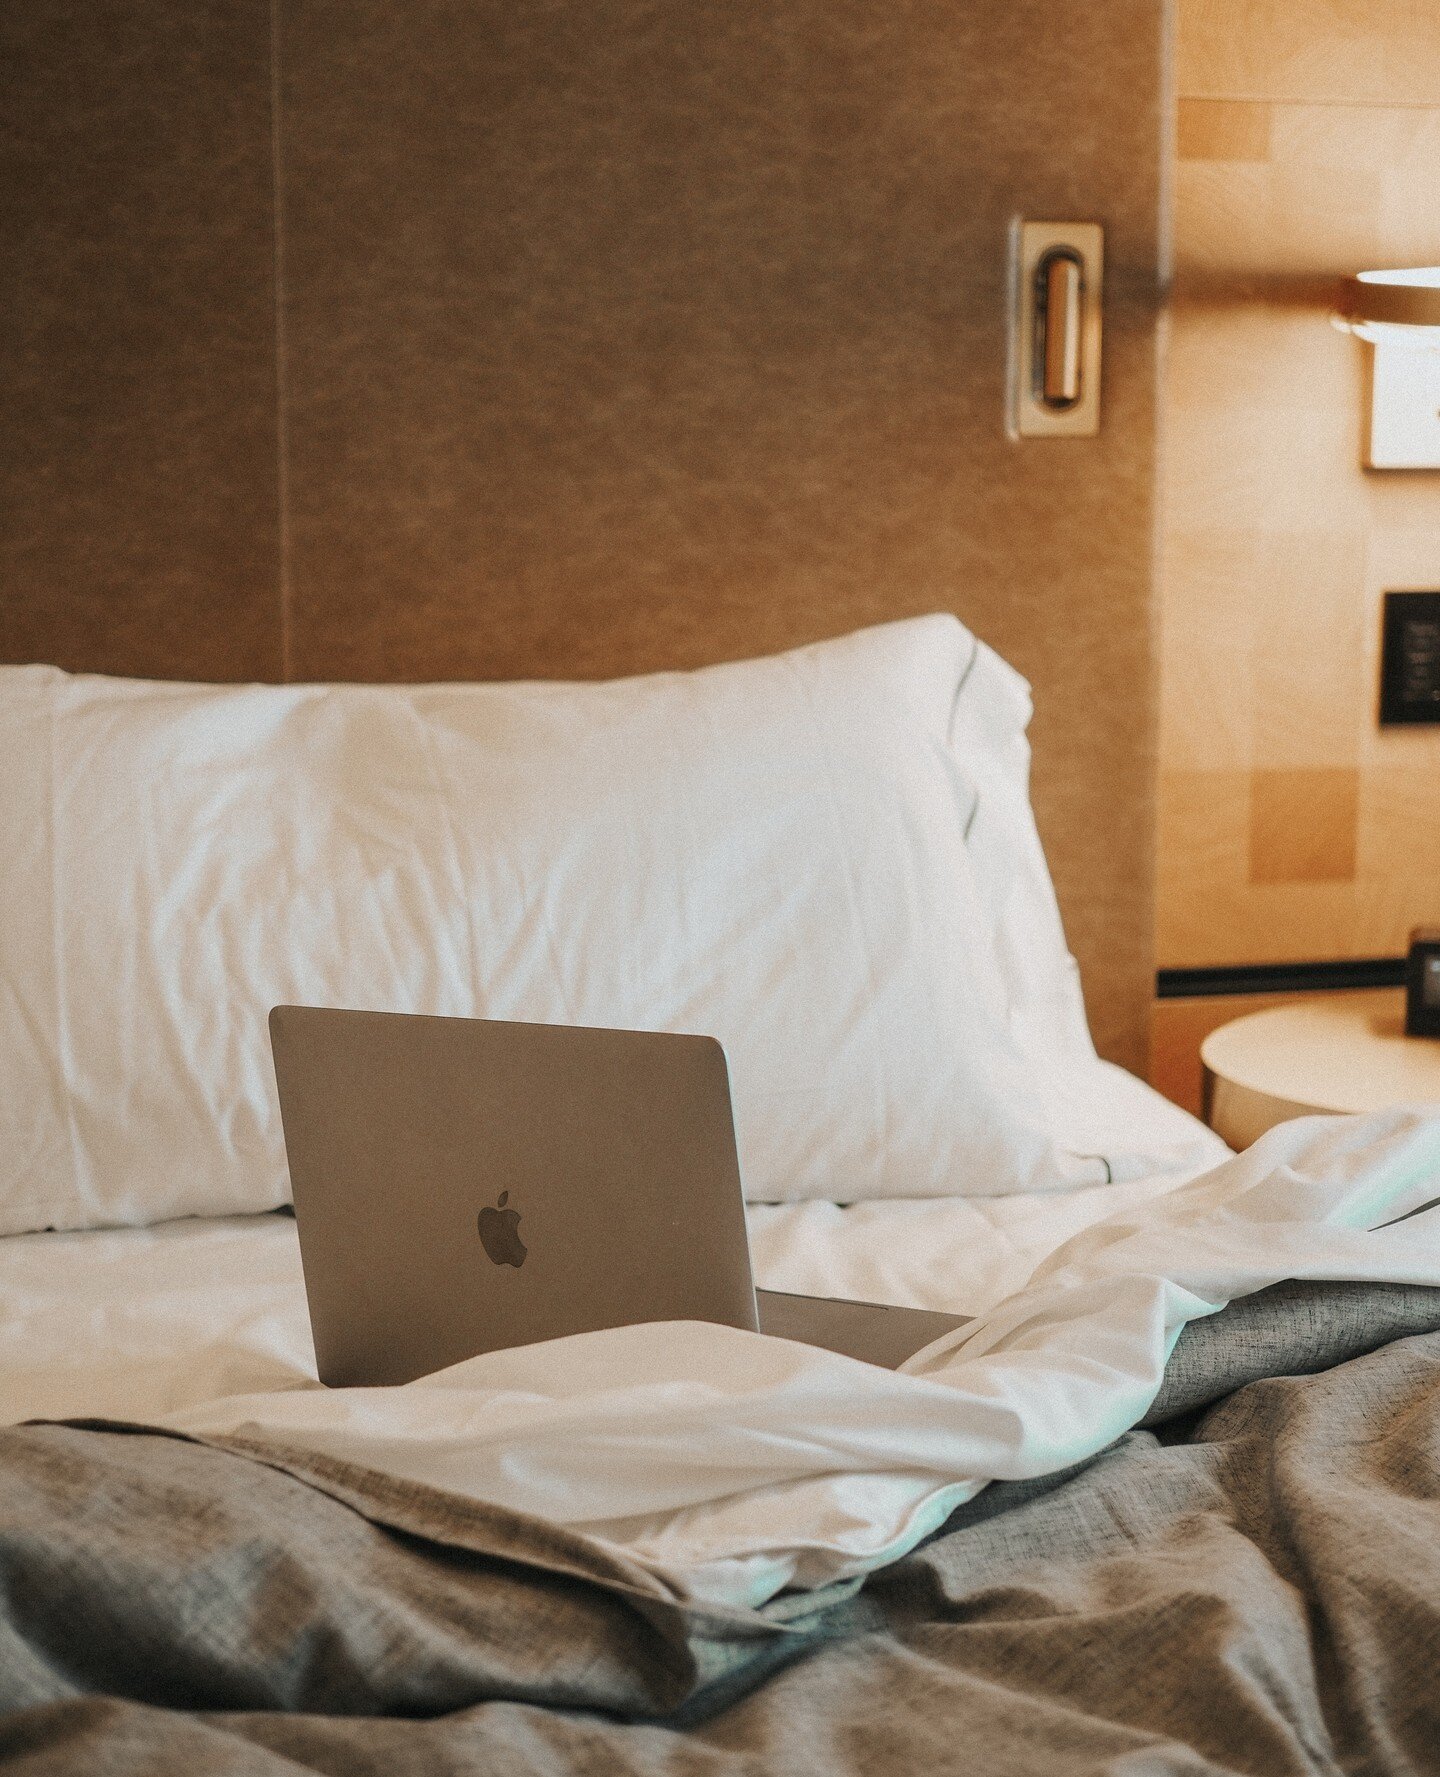 The secret for better marketing and content on hotel socials is utilizing lifestyle photos instead of the typical bland stock photo!⁠
⁠
How does your target customer want to feel in his/her room? What about the aesthetic? Nearby coffee shops and rest